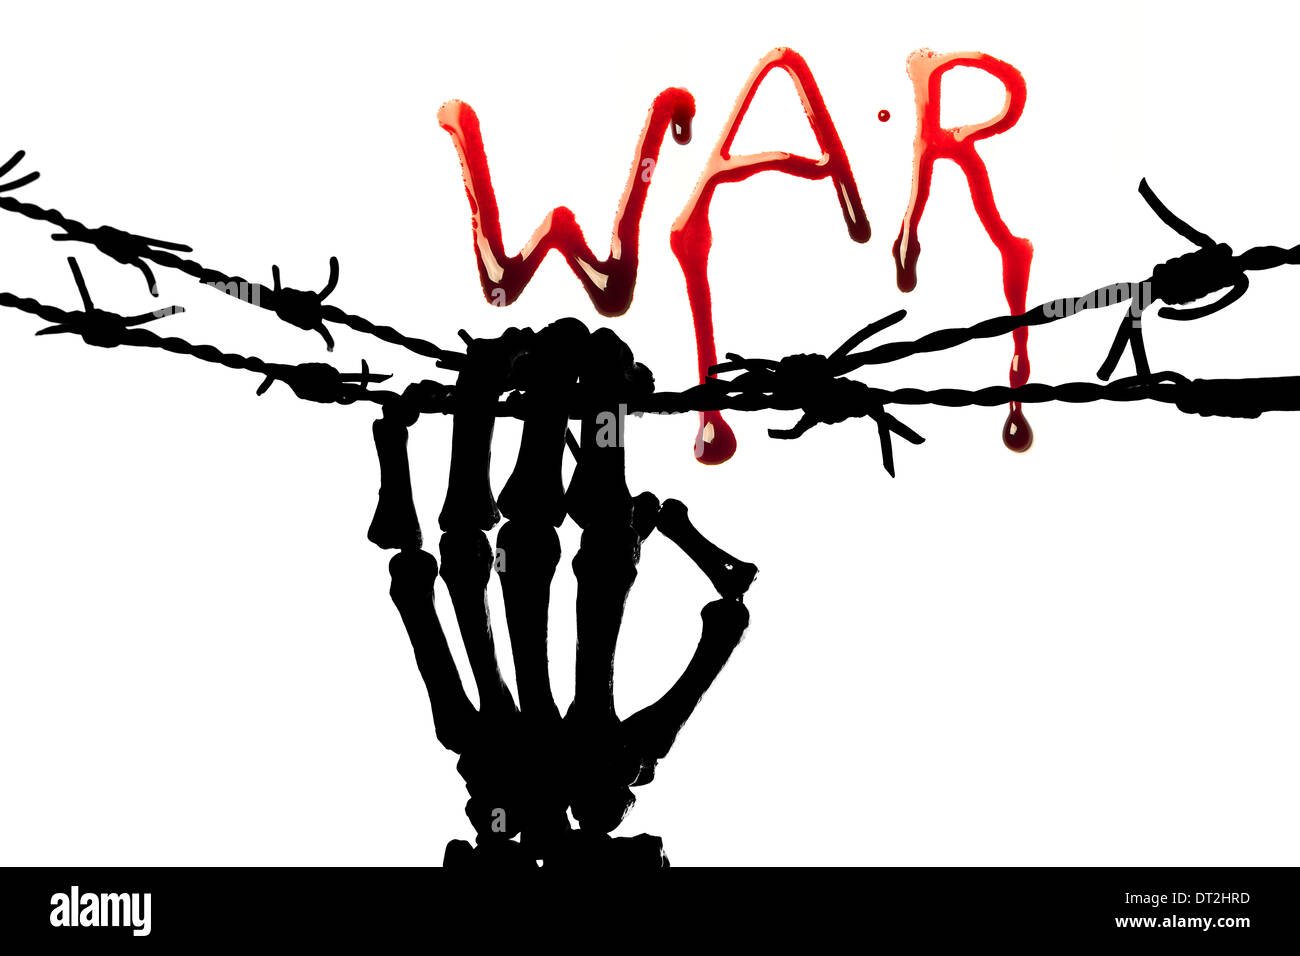 War in bleeding letters and a silhouette of a skeleton hand holding barbed wire Stock Photo